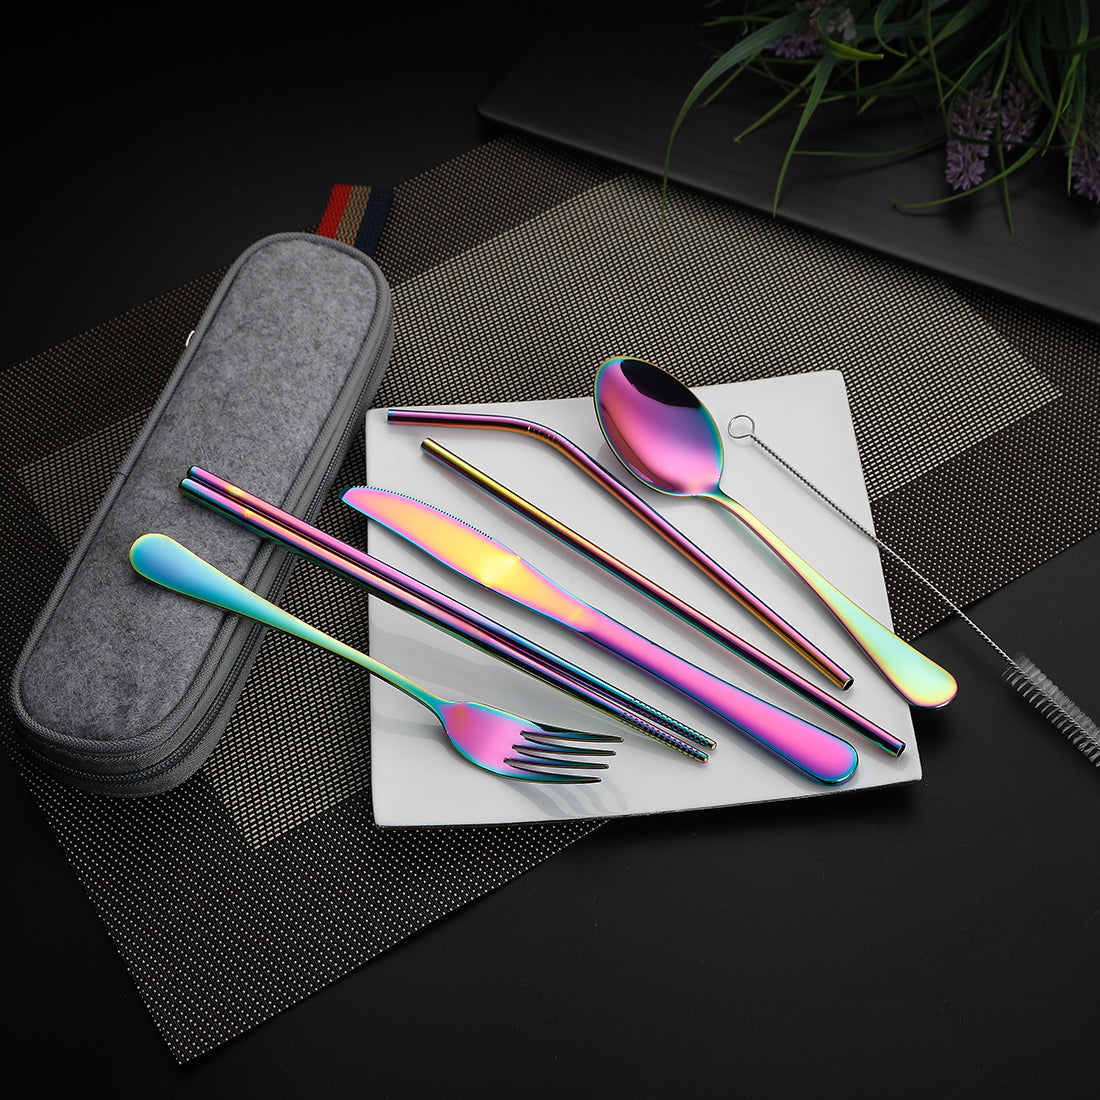 Devico Portable Utensils, Travel Camping Cutlery Set, 8-Piece including Knife Fork Spoon Chopsticks Cleaning Brush Straws Portable Case, Stainless Steel Flatware set (8-piece Rainbow)